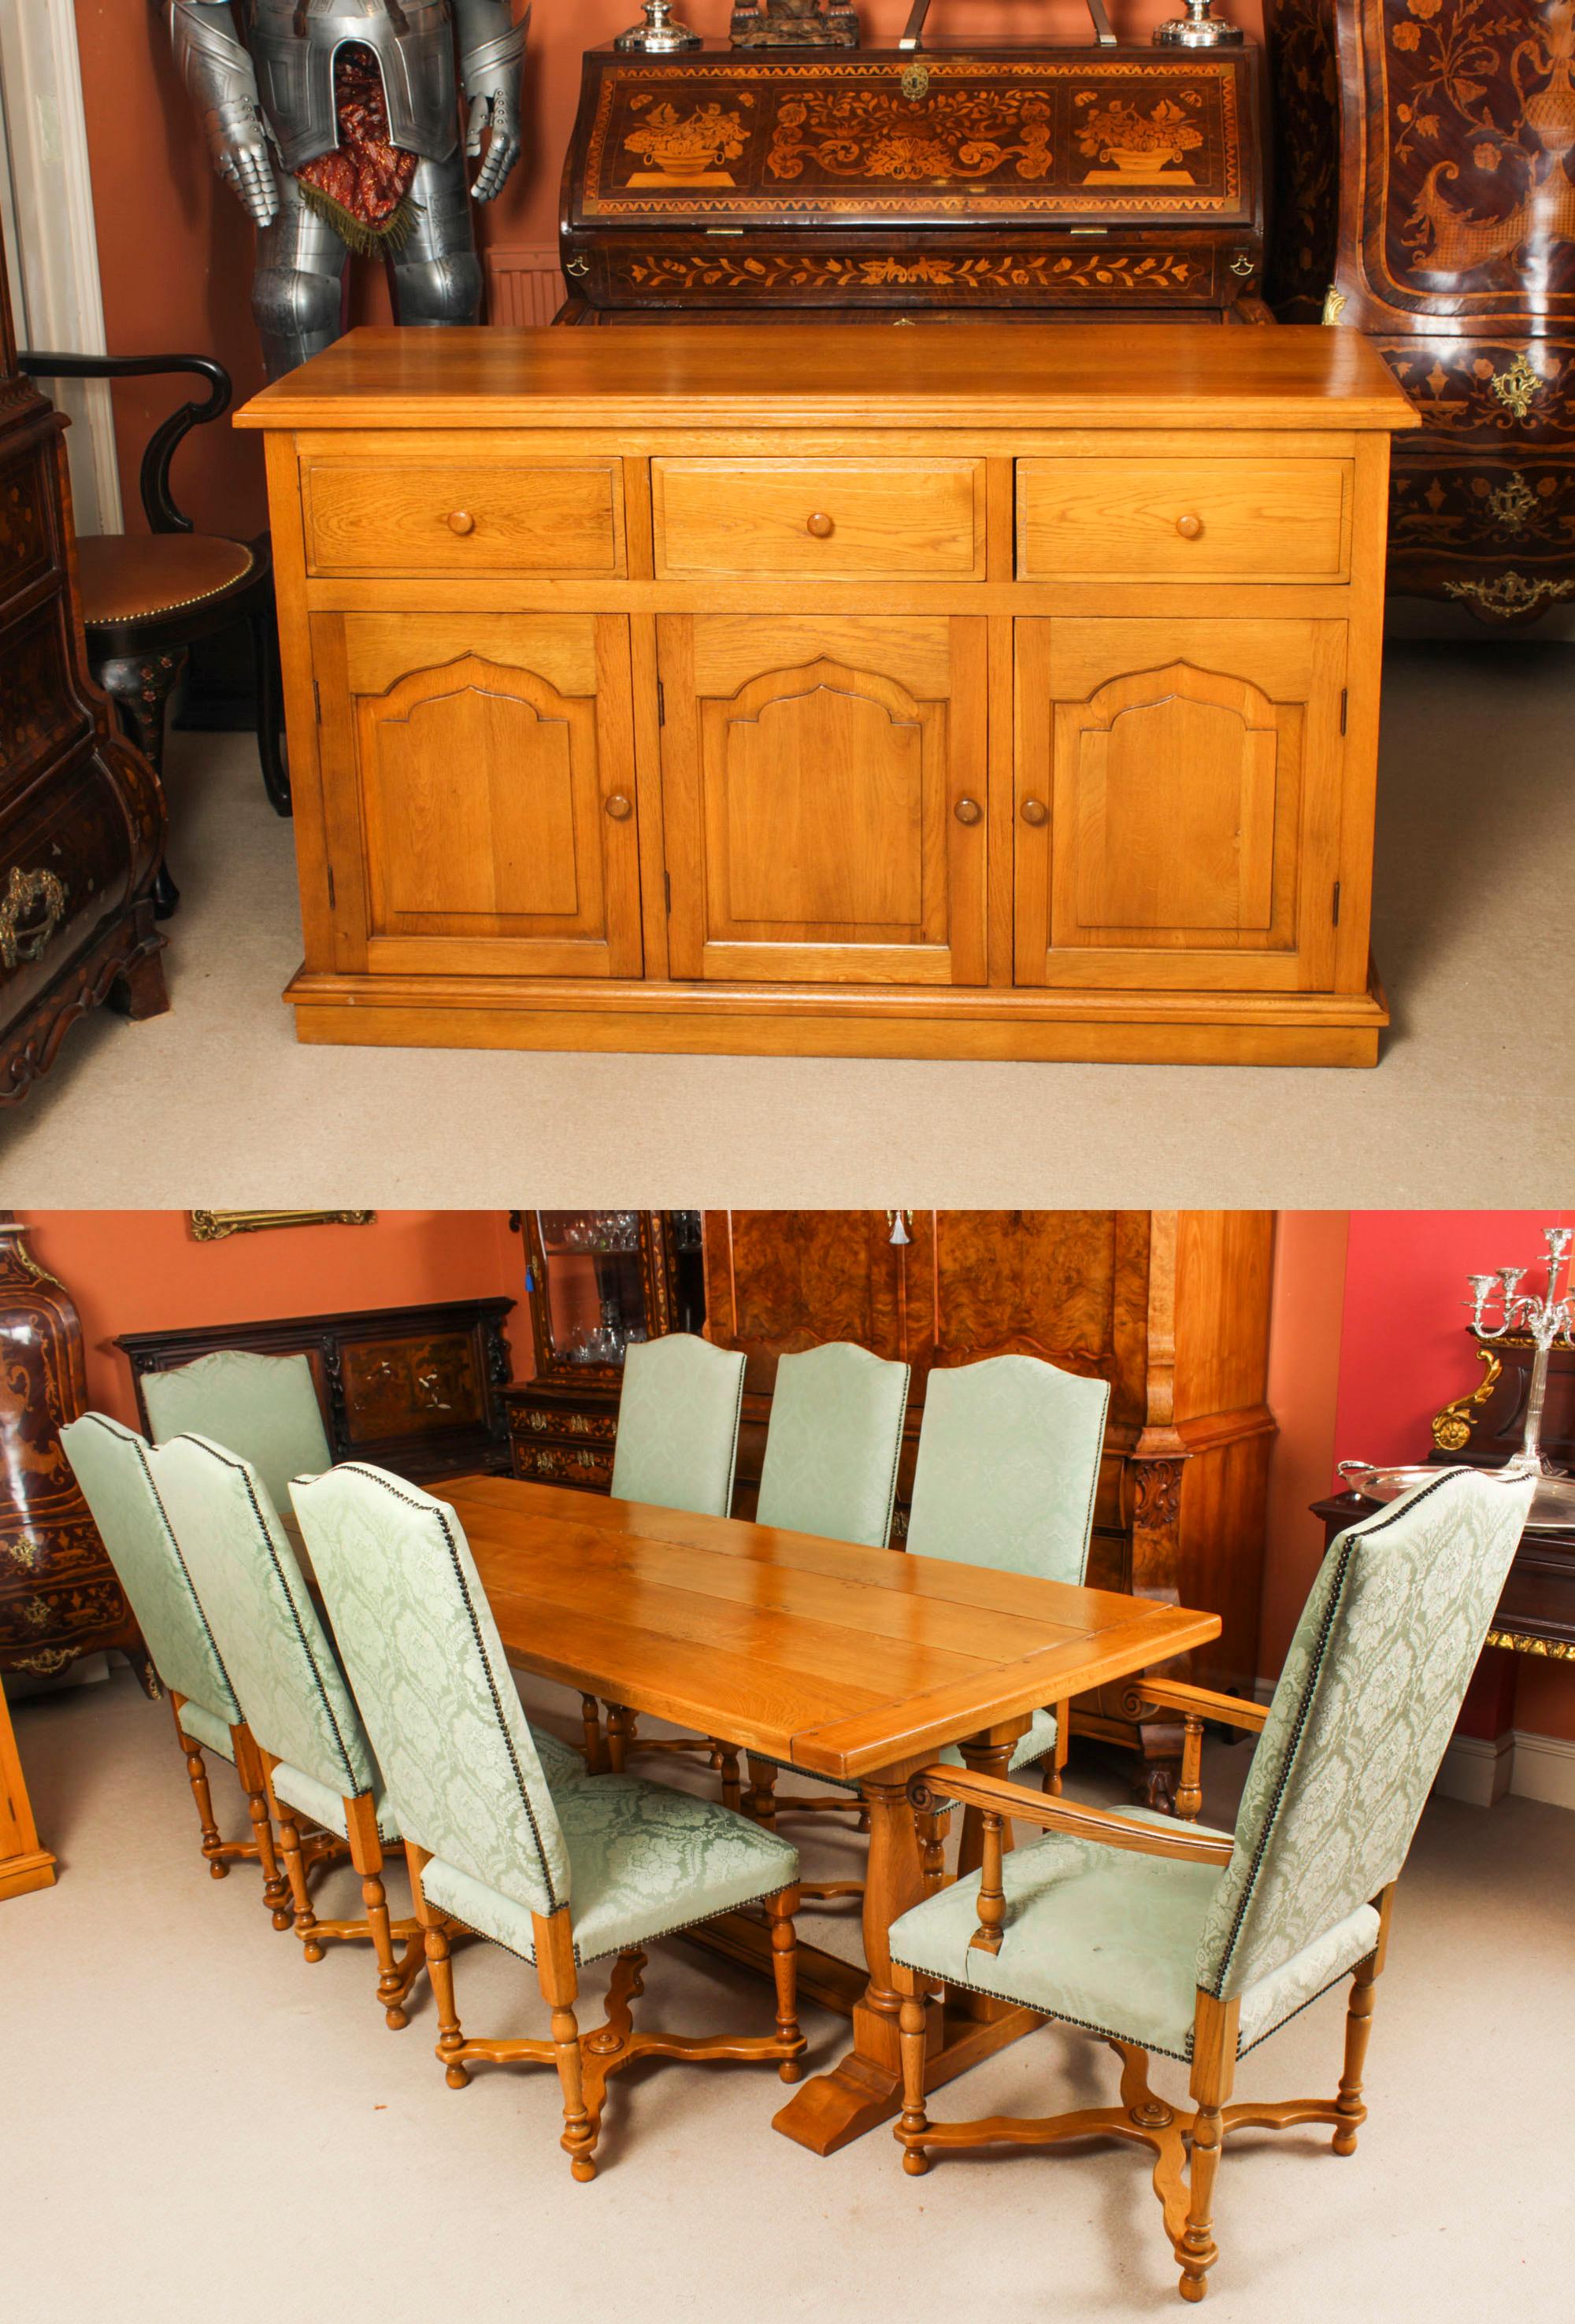 An exquisite English solid oak dining suite comprising a refectory table, a set of eight upholstered back chairs and a sideboard, made by Brights of Nettlebed and dating from the late 20th Century.

This beautiful refectory table, the chairs and the